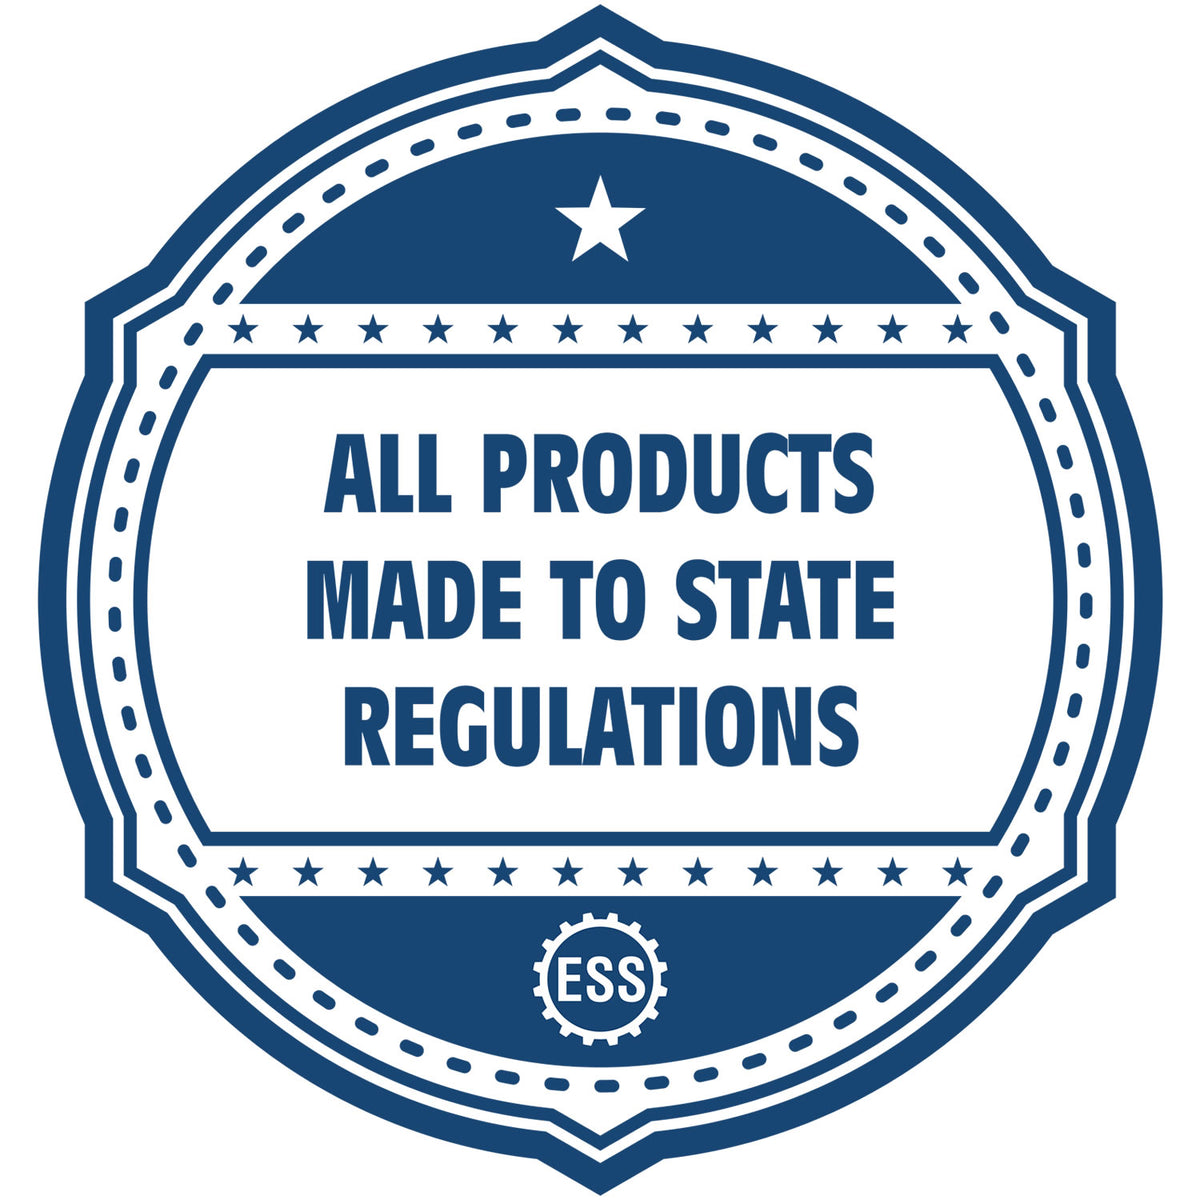 A blue icon or badge for the Hybrid Florida Engineer Seal showing that this product is made in compliance with state regulations.